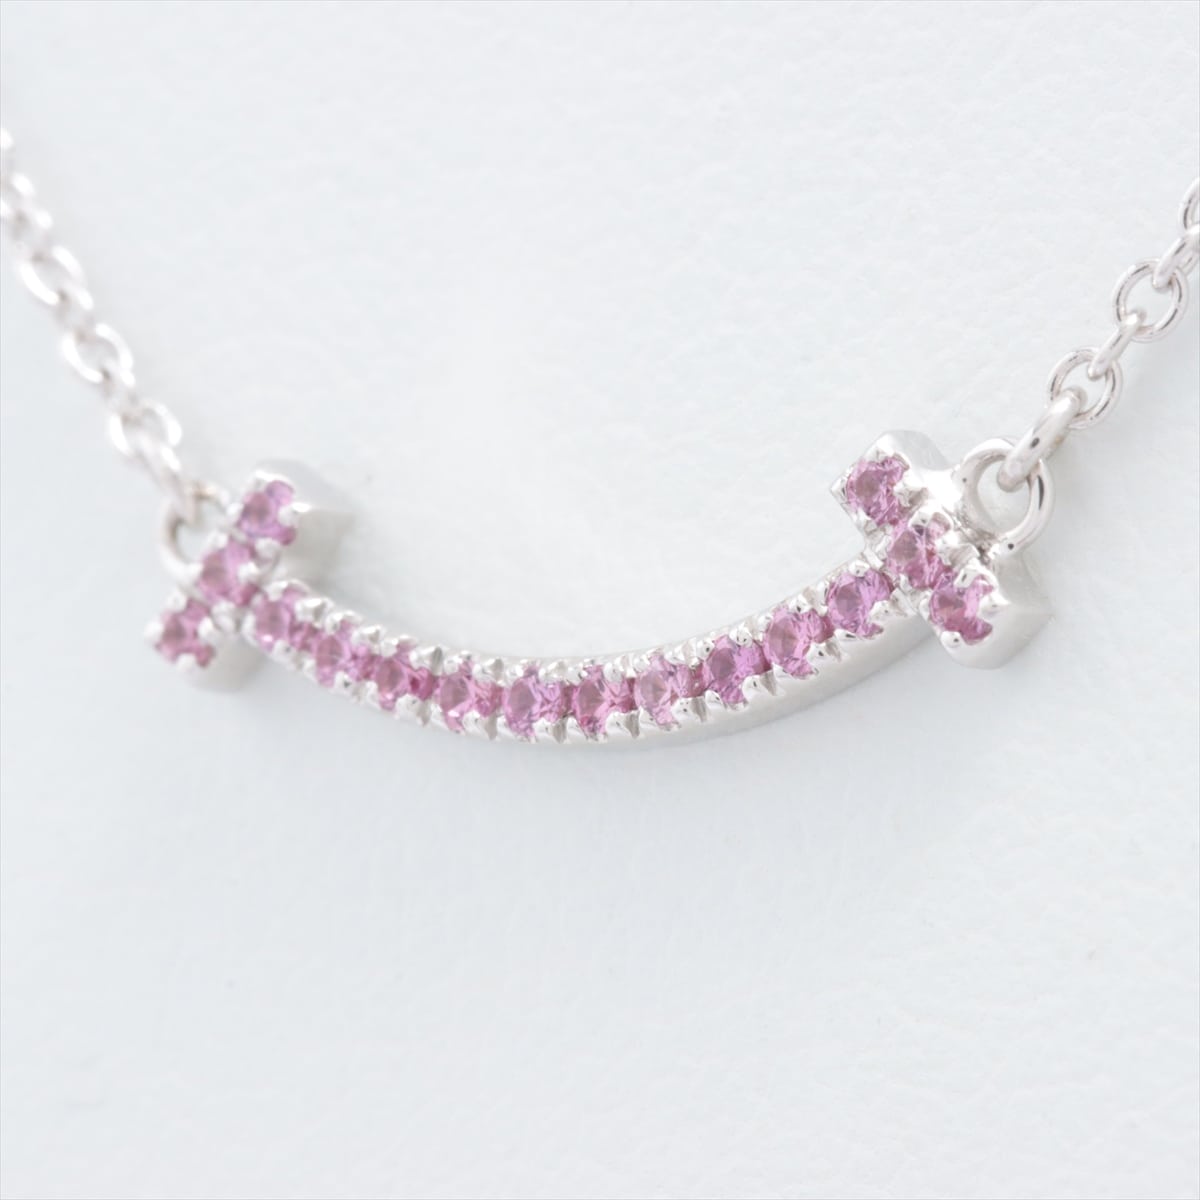 Tiffany T Smile Micro Pink sapphire Necklace 750 2.4g WG